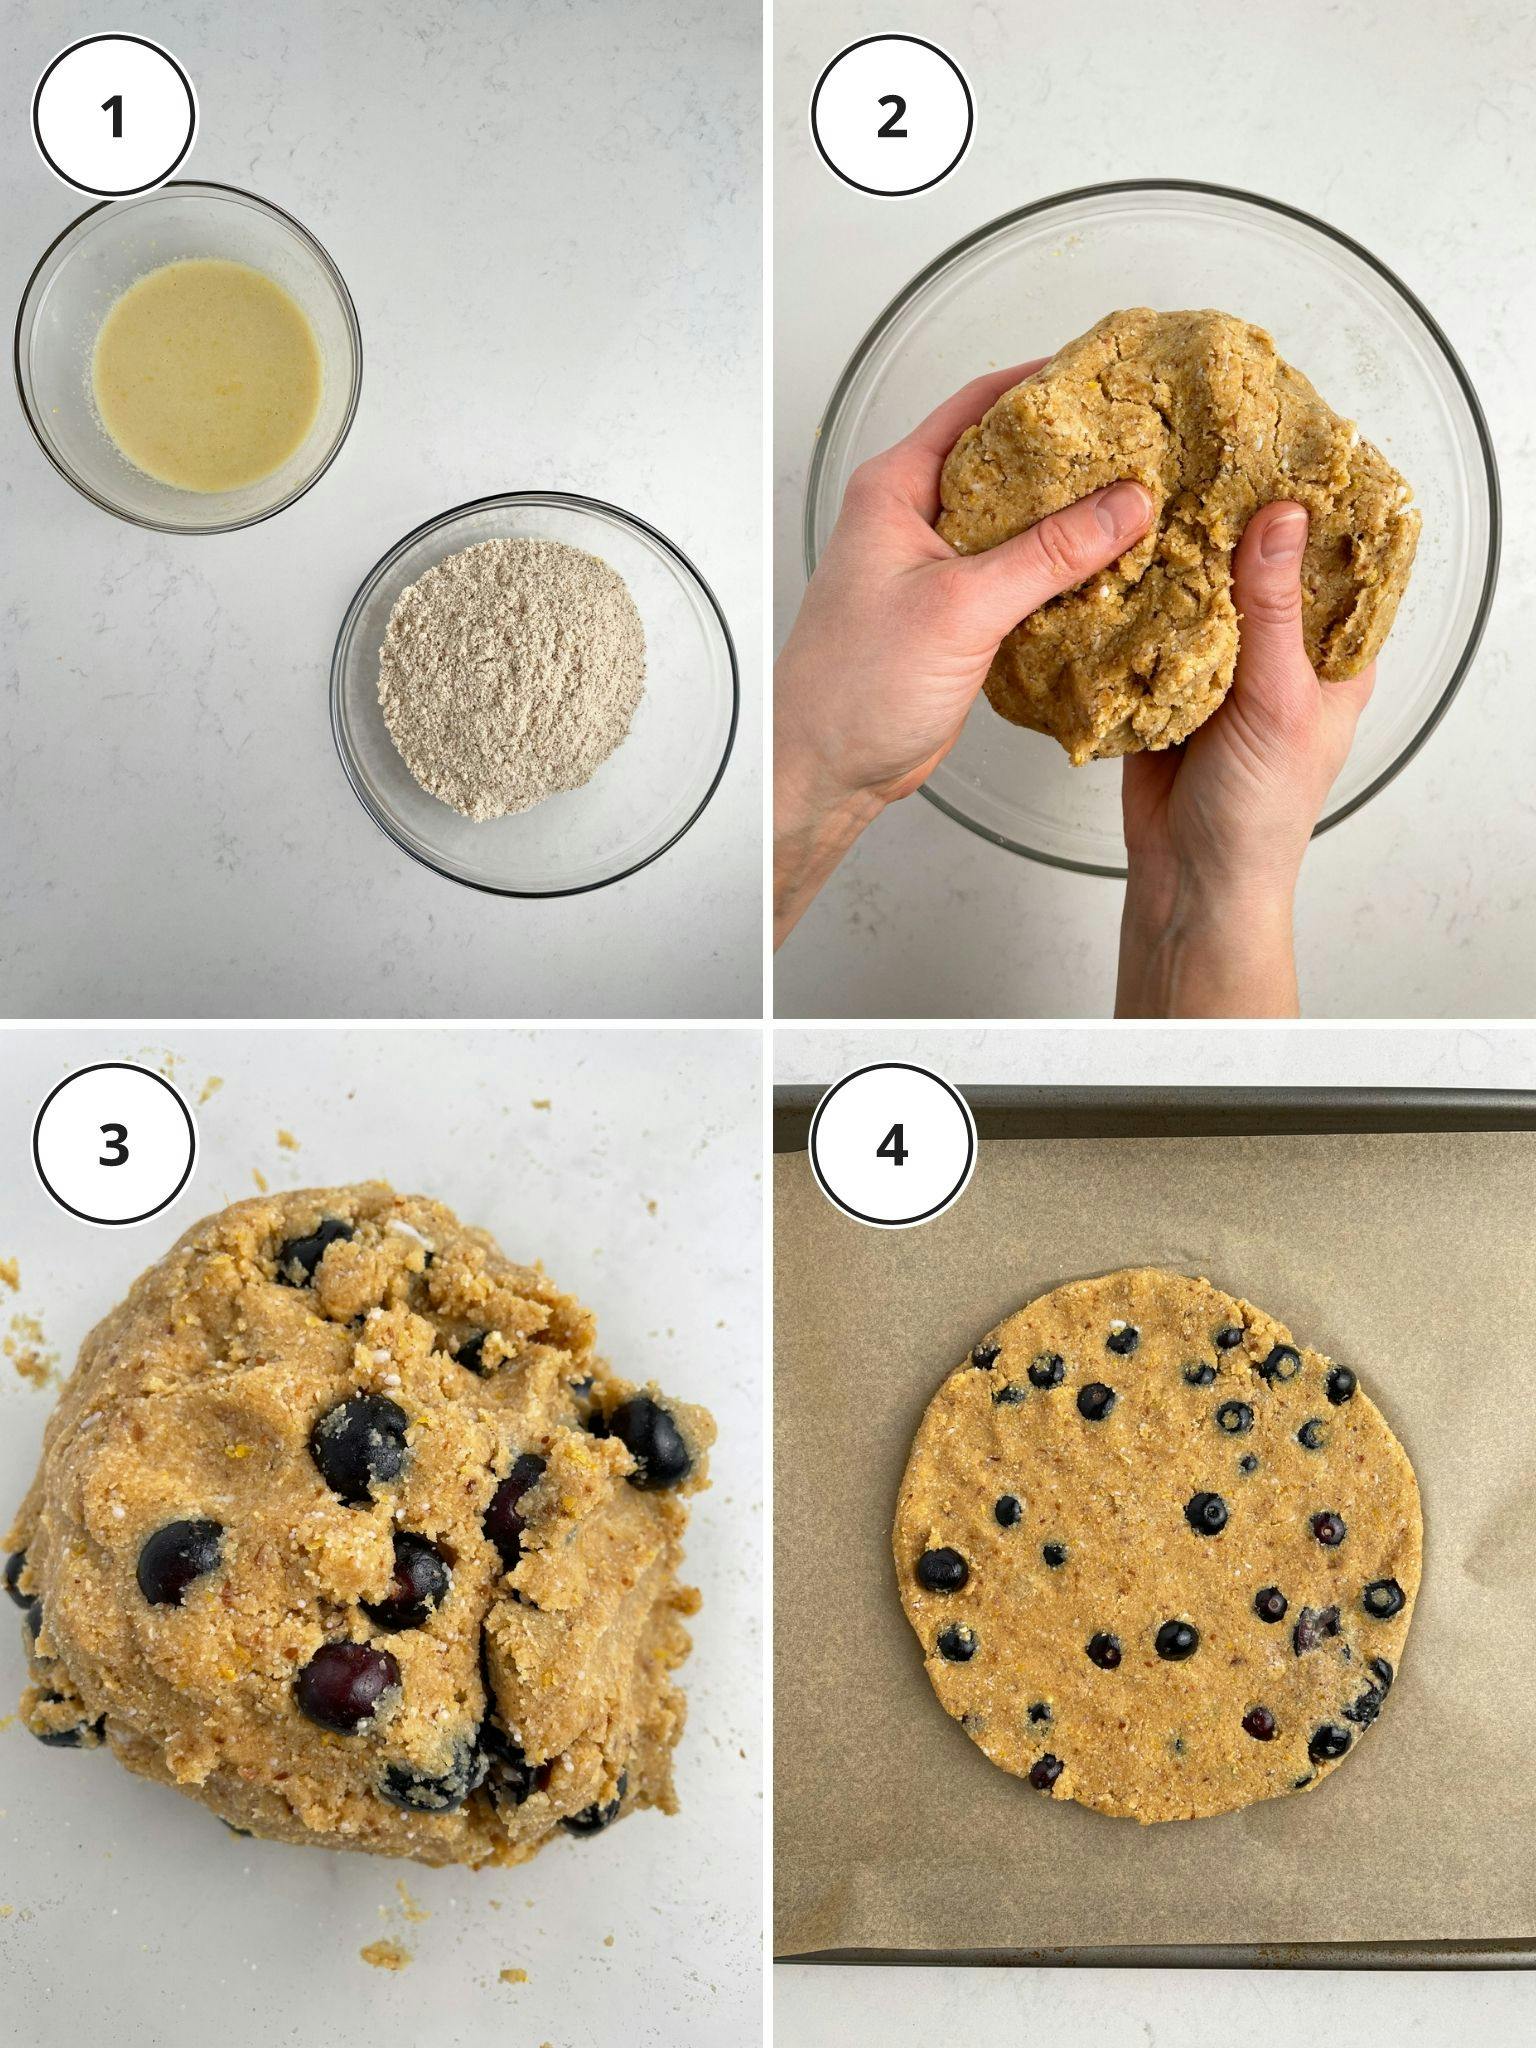 The first four steps to make these scones.